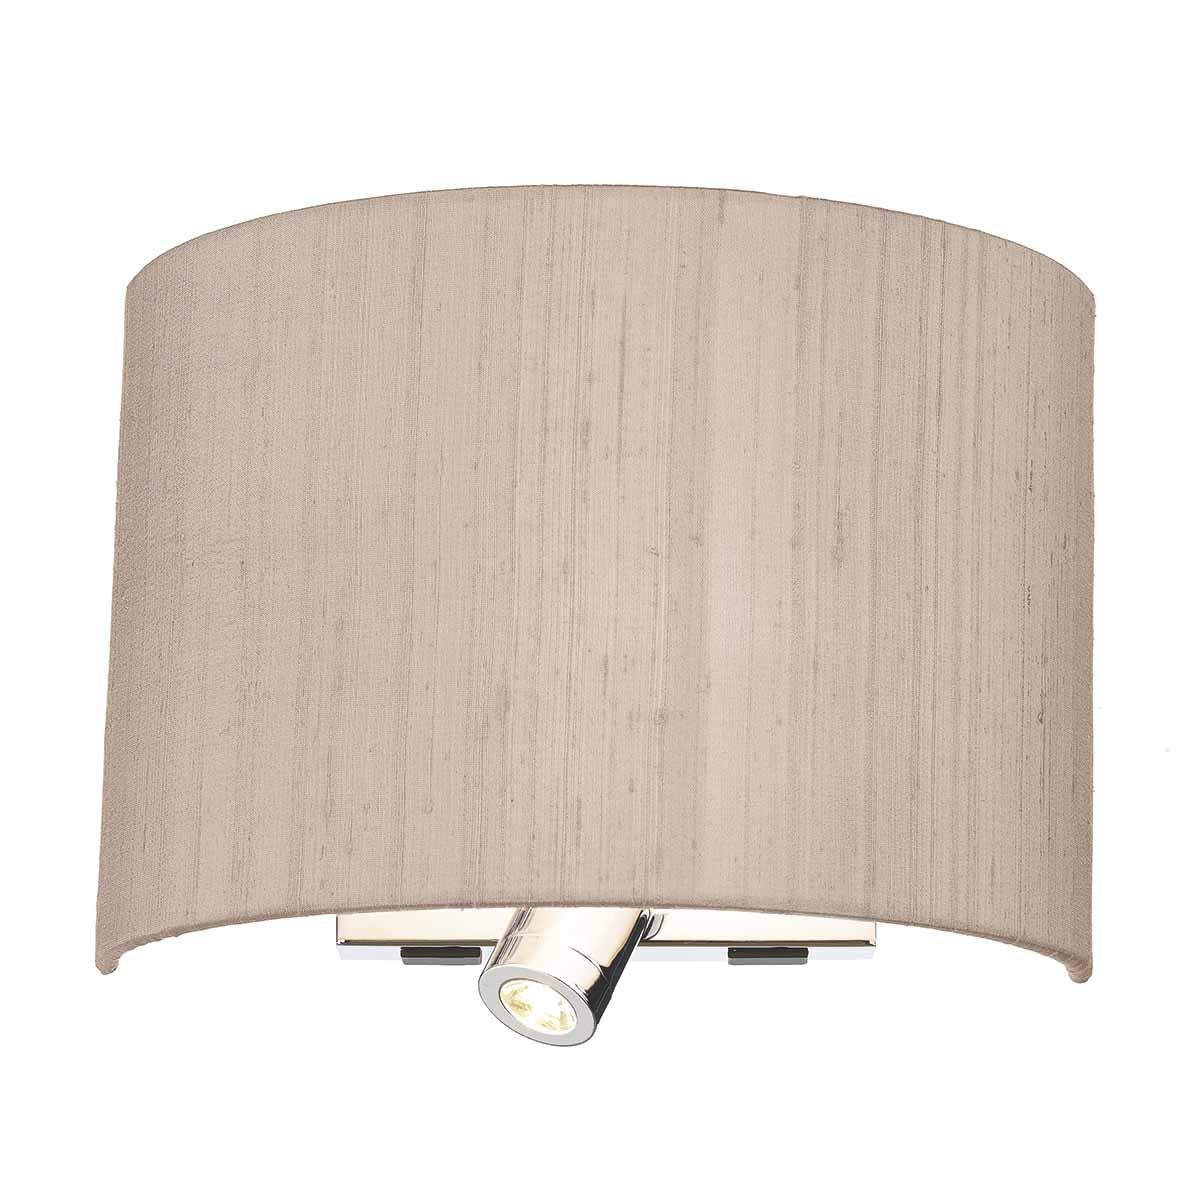 Wetzlar Wall Light Comes with Silk Shade WET0999 - The Light Company